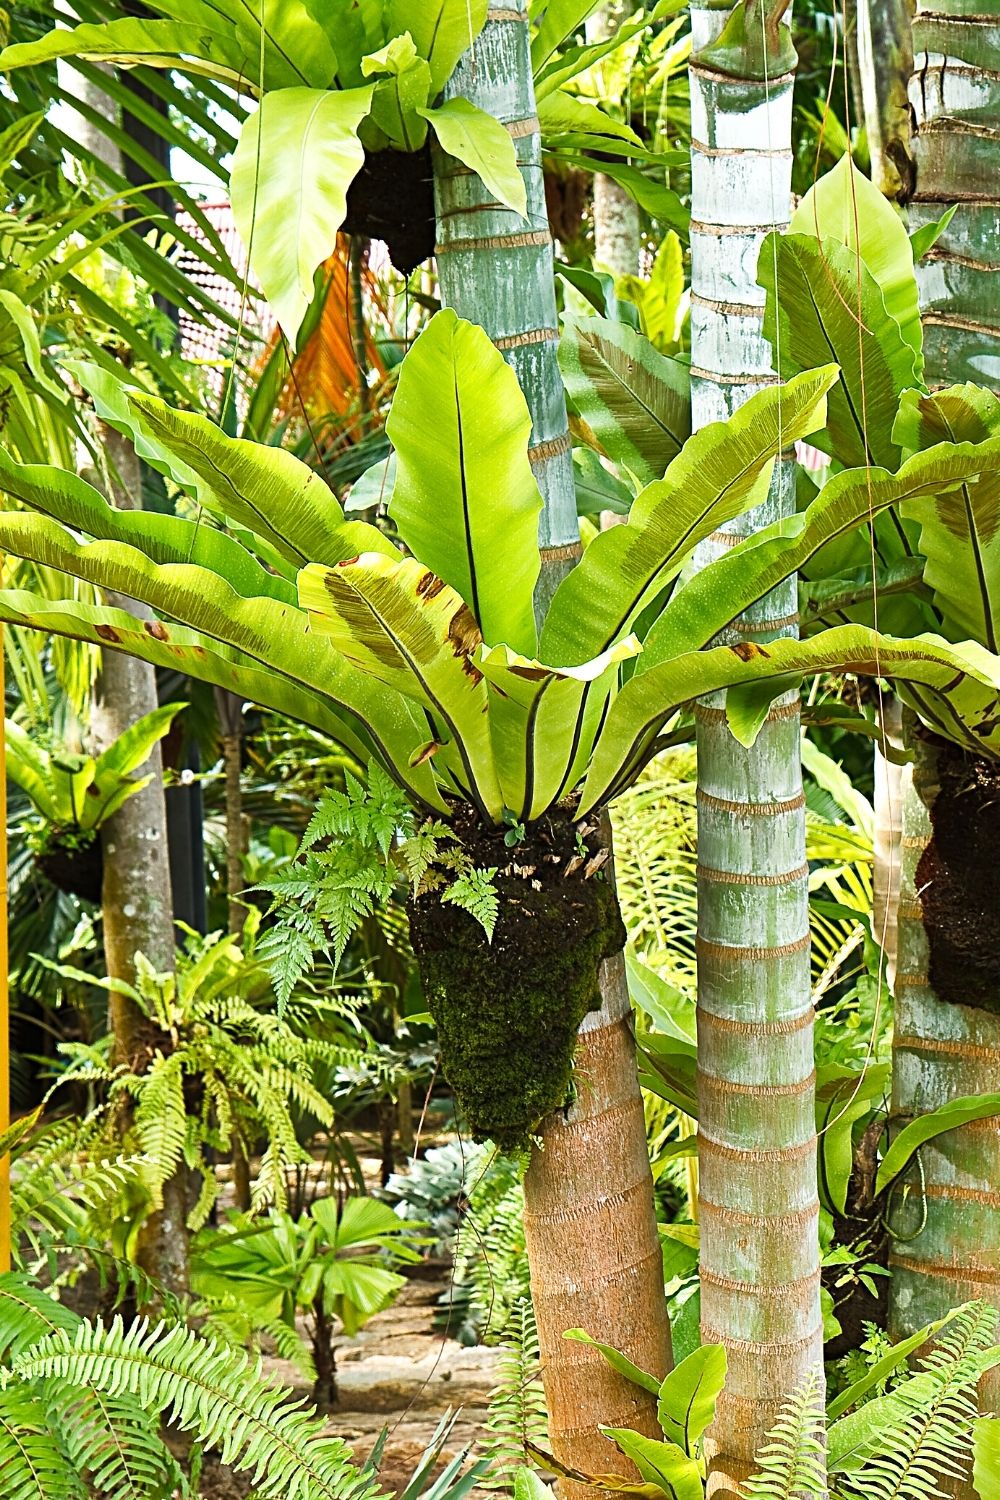 Bird's nest fern is one of the most common ferns that are propagated as houseplants, which makes it perfect to grow in a terrarium